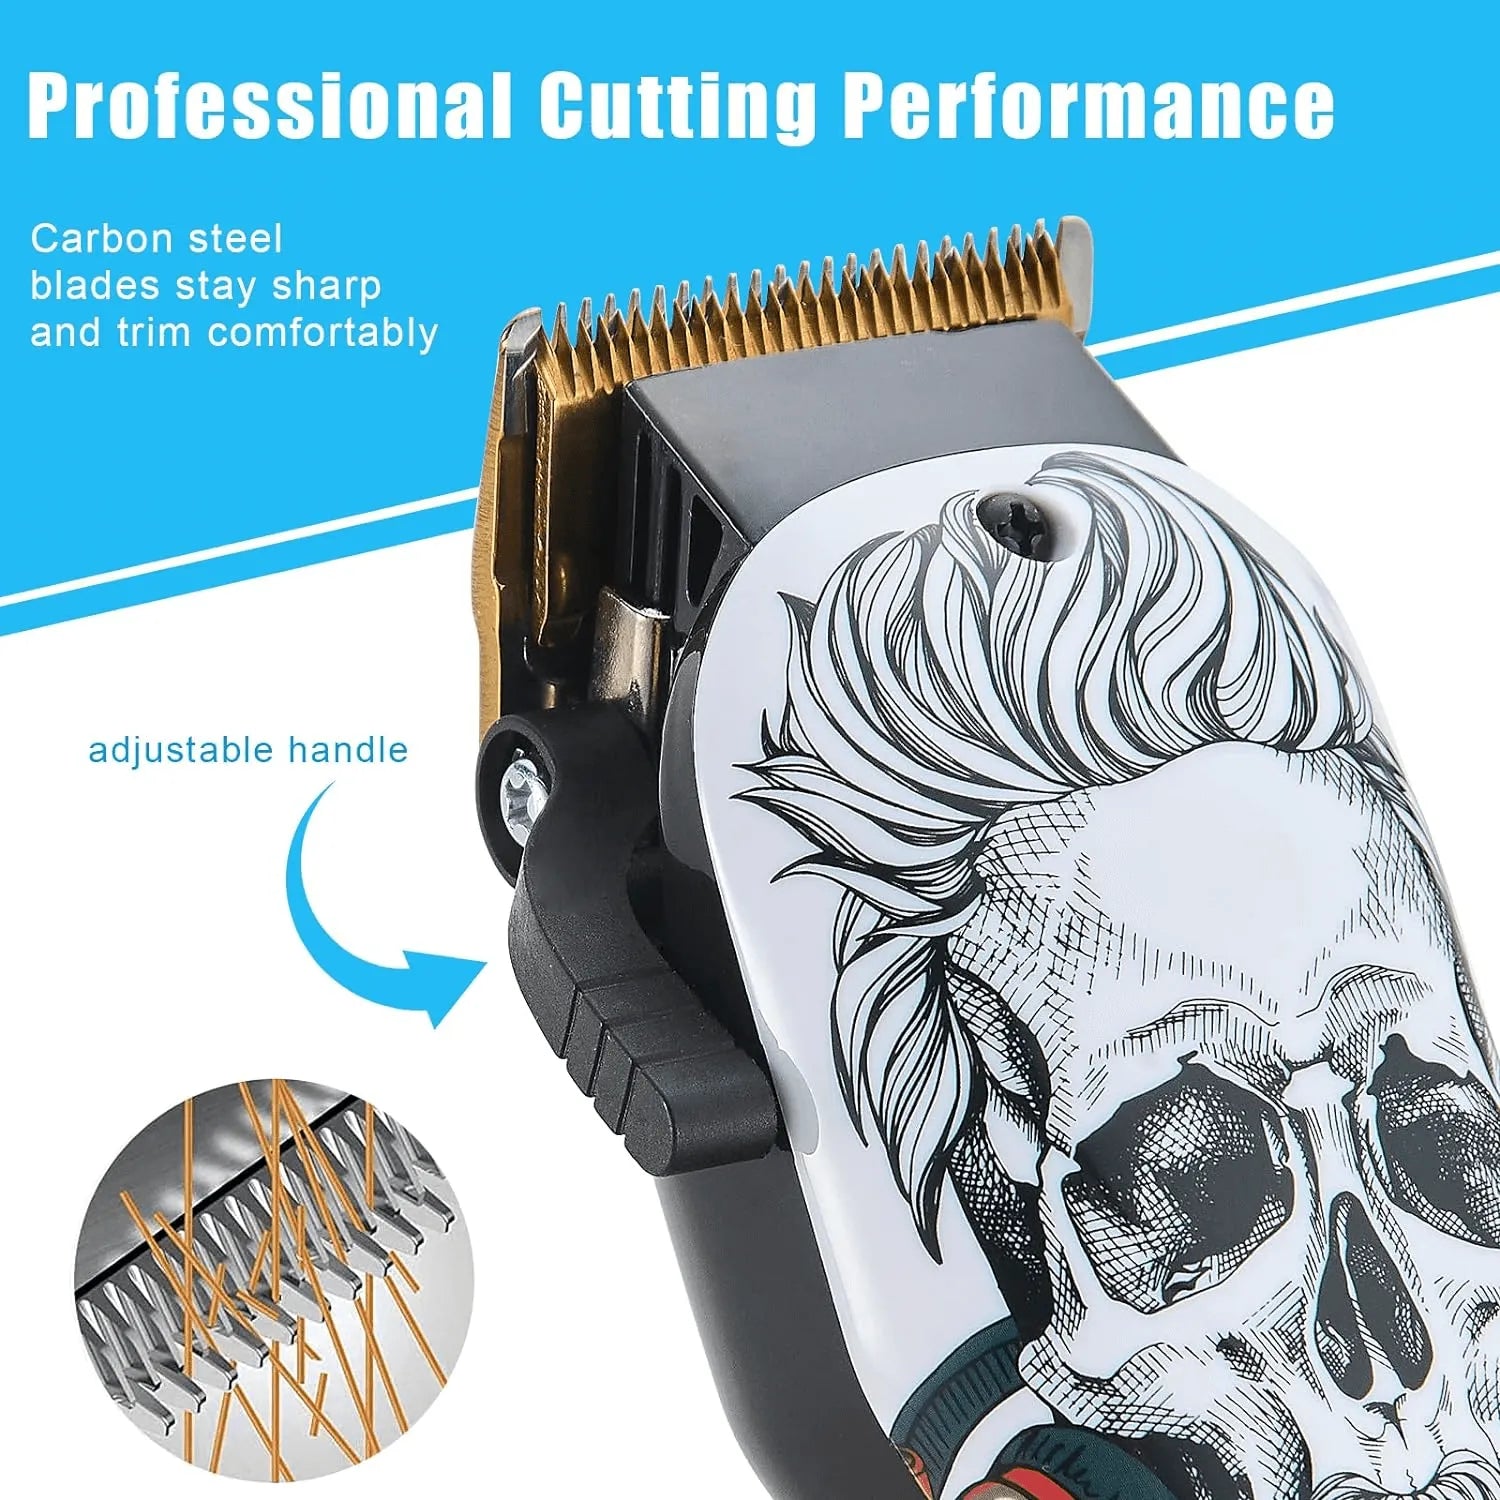 BESTBOG-V 31GT Professional Hair Clippers